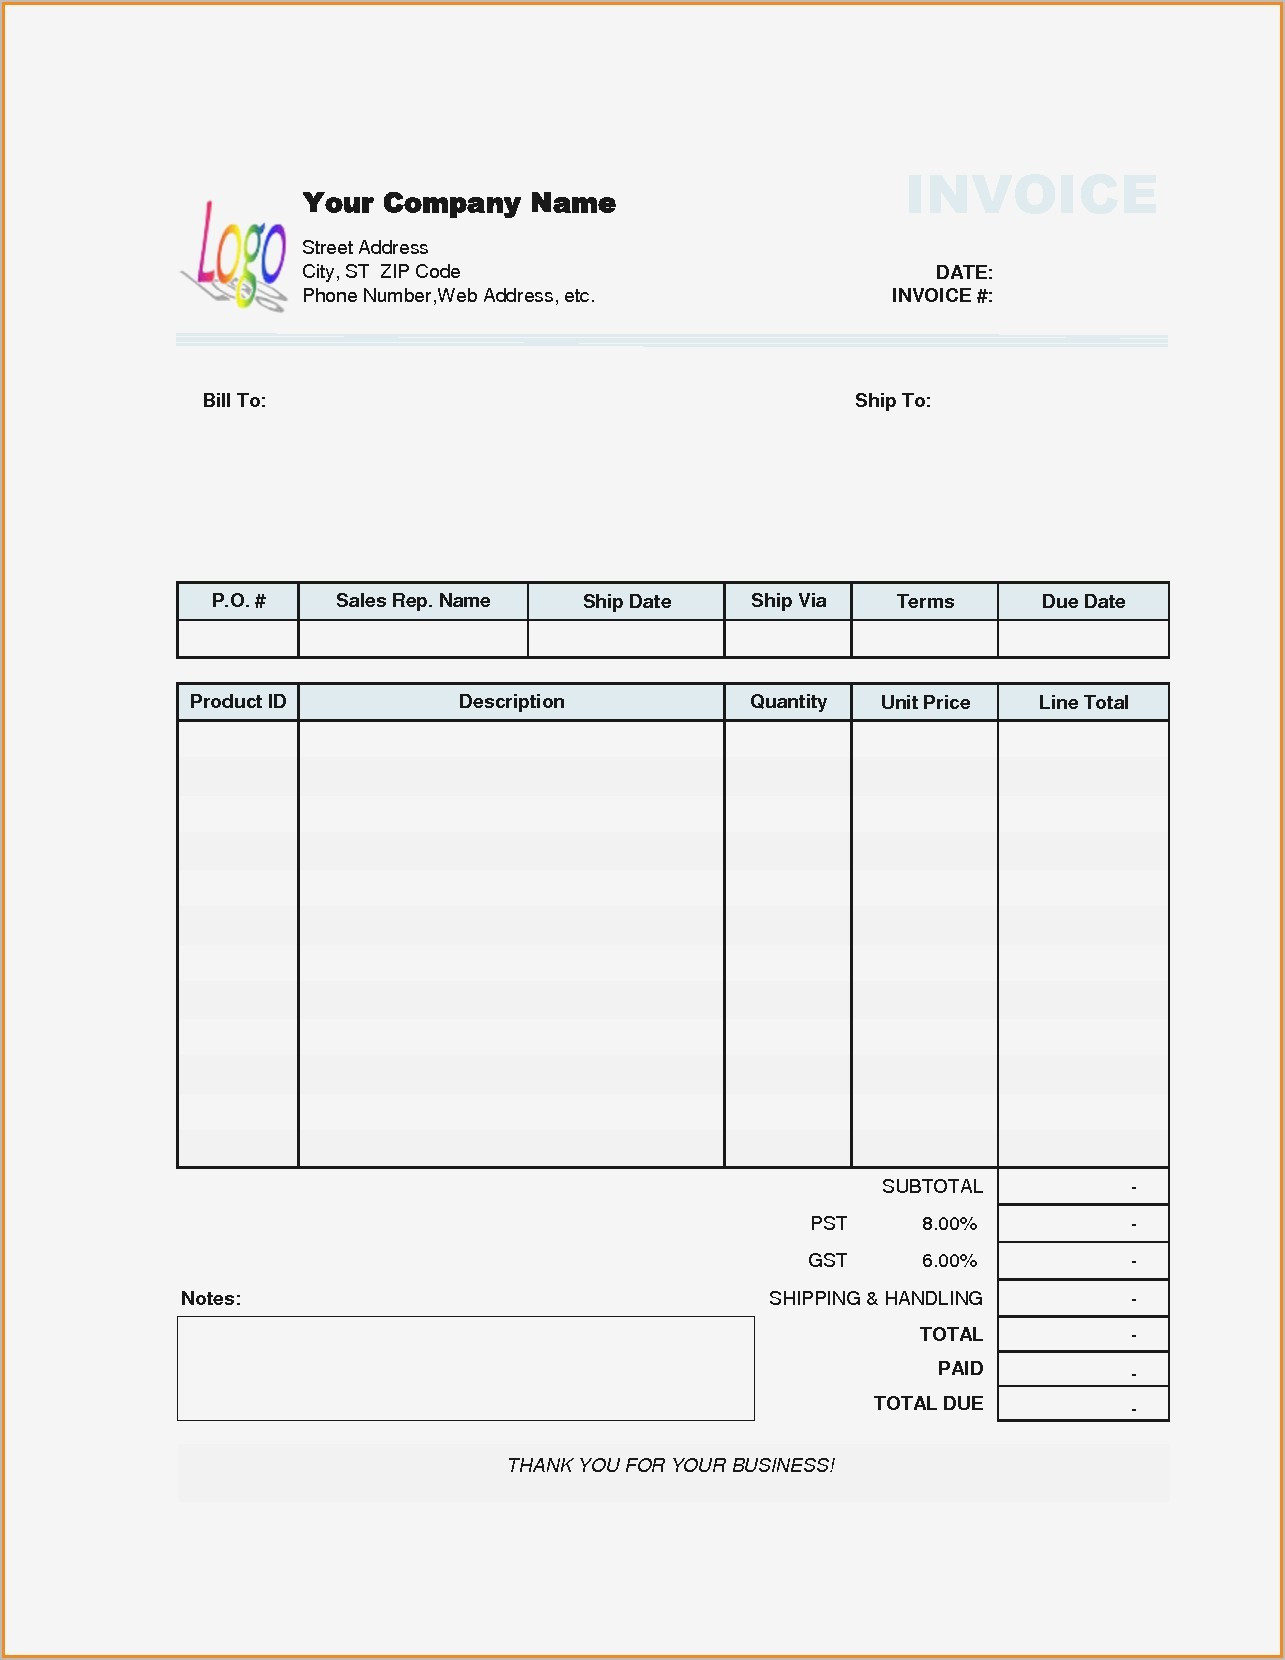 Invoice Examples Blank Template Pdf Free Service Receipt Throughout Fillable Invoice Template Pdf